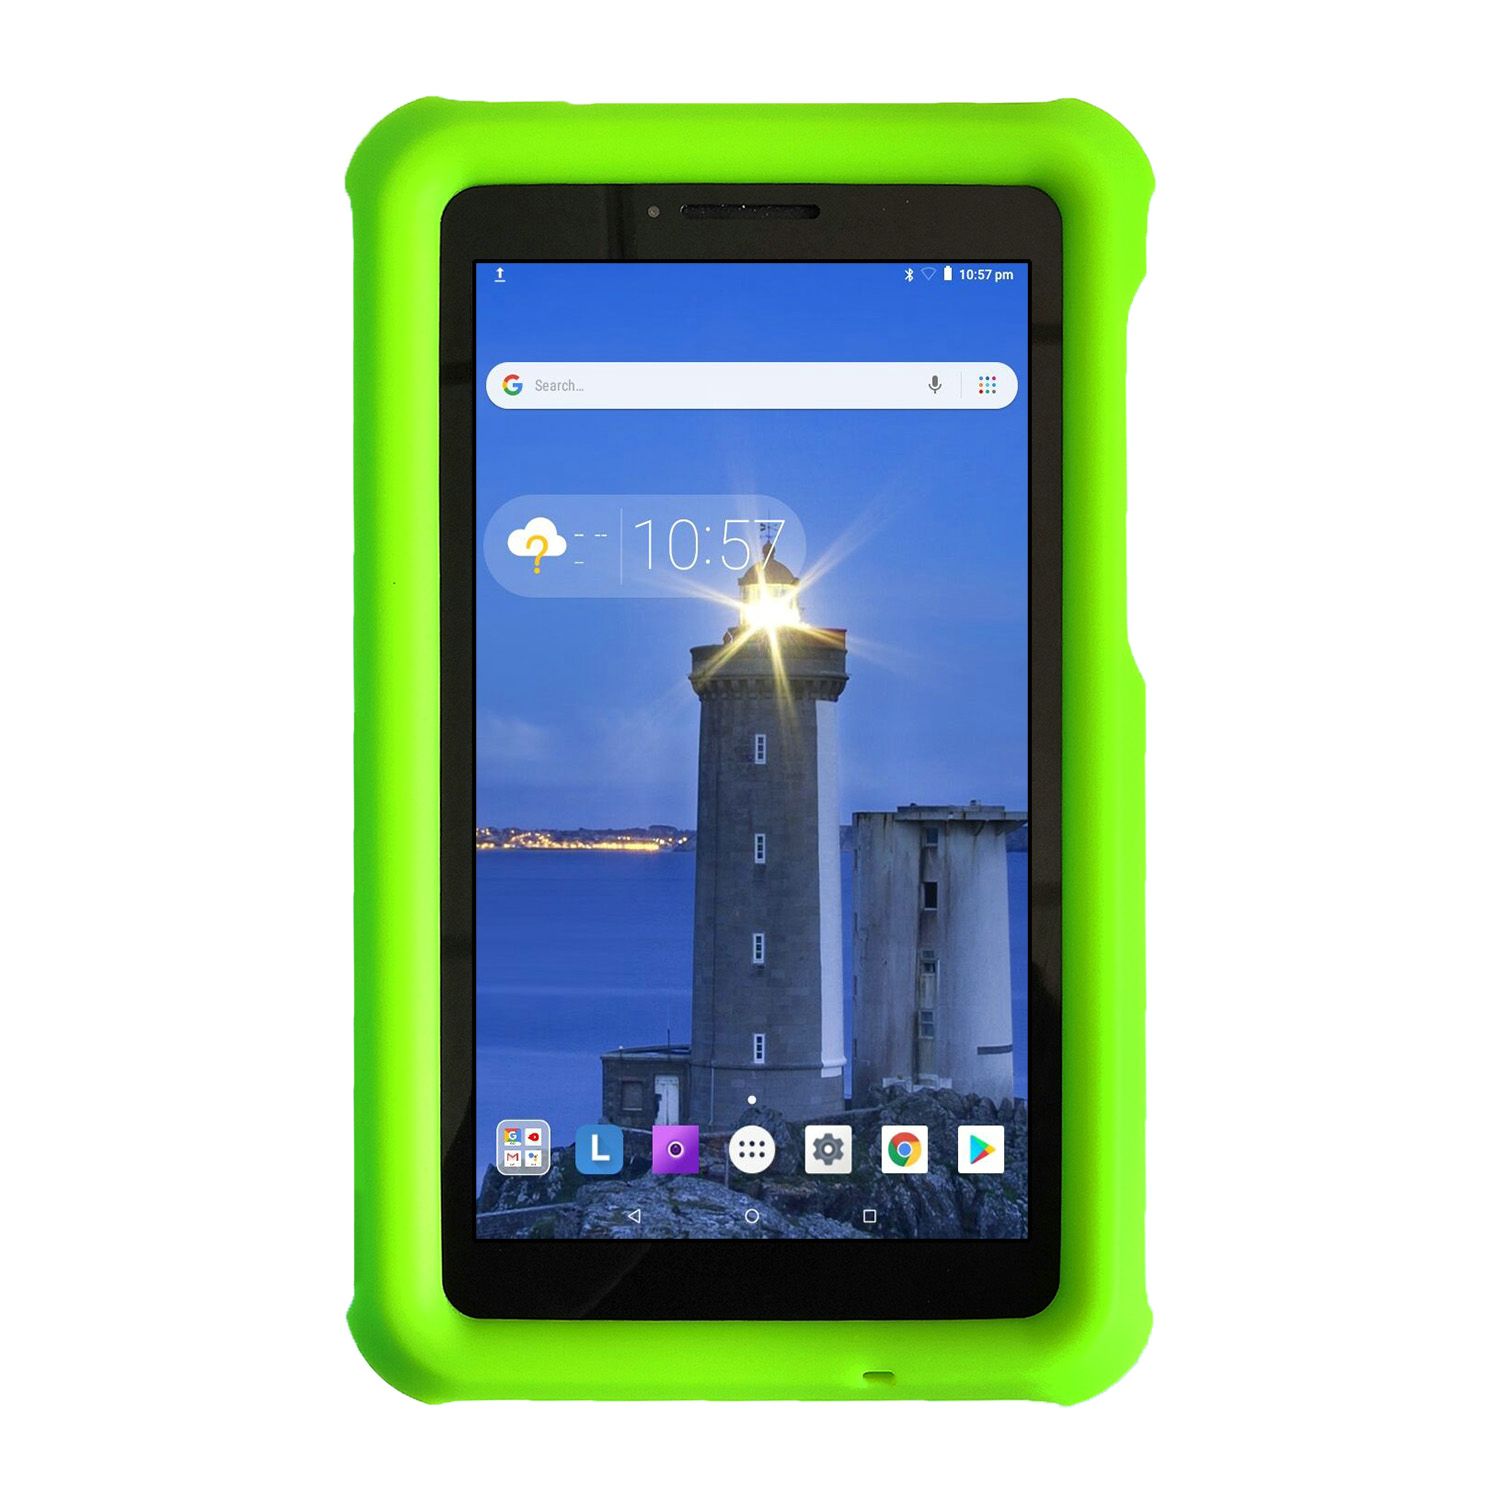 nok spand Moralsk uddannelse MingShore Silicone Rugged Heavy Duty Protective Cover For Lenovo TAB E7 TB  7104F 7 Inch Tablet Case From Bobjgearcn, $11.01 | DHgate.Com